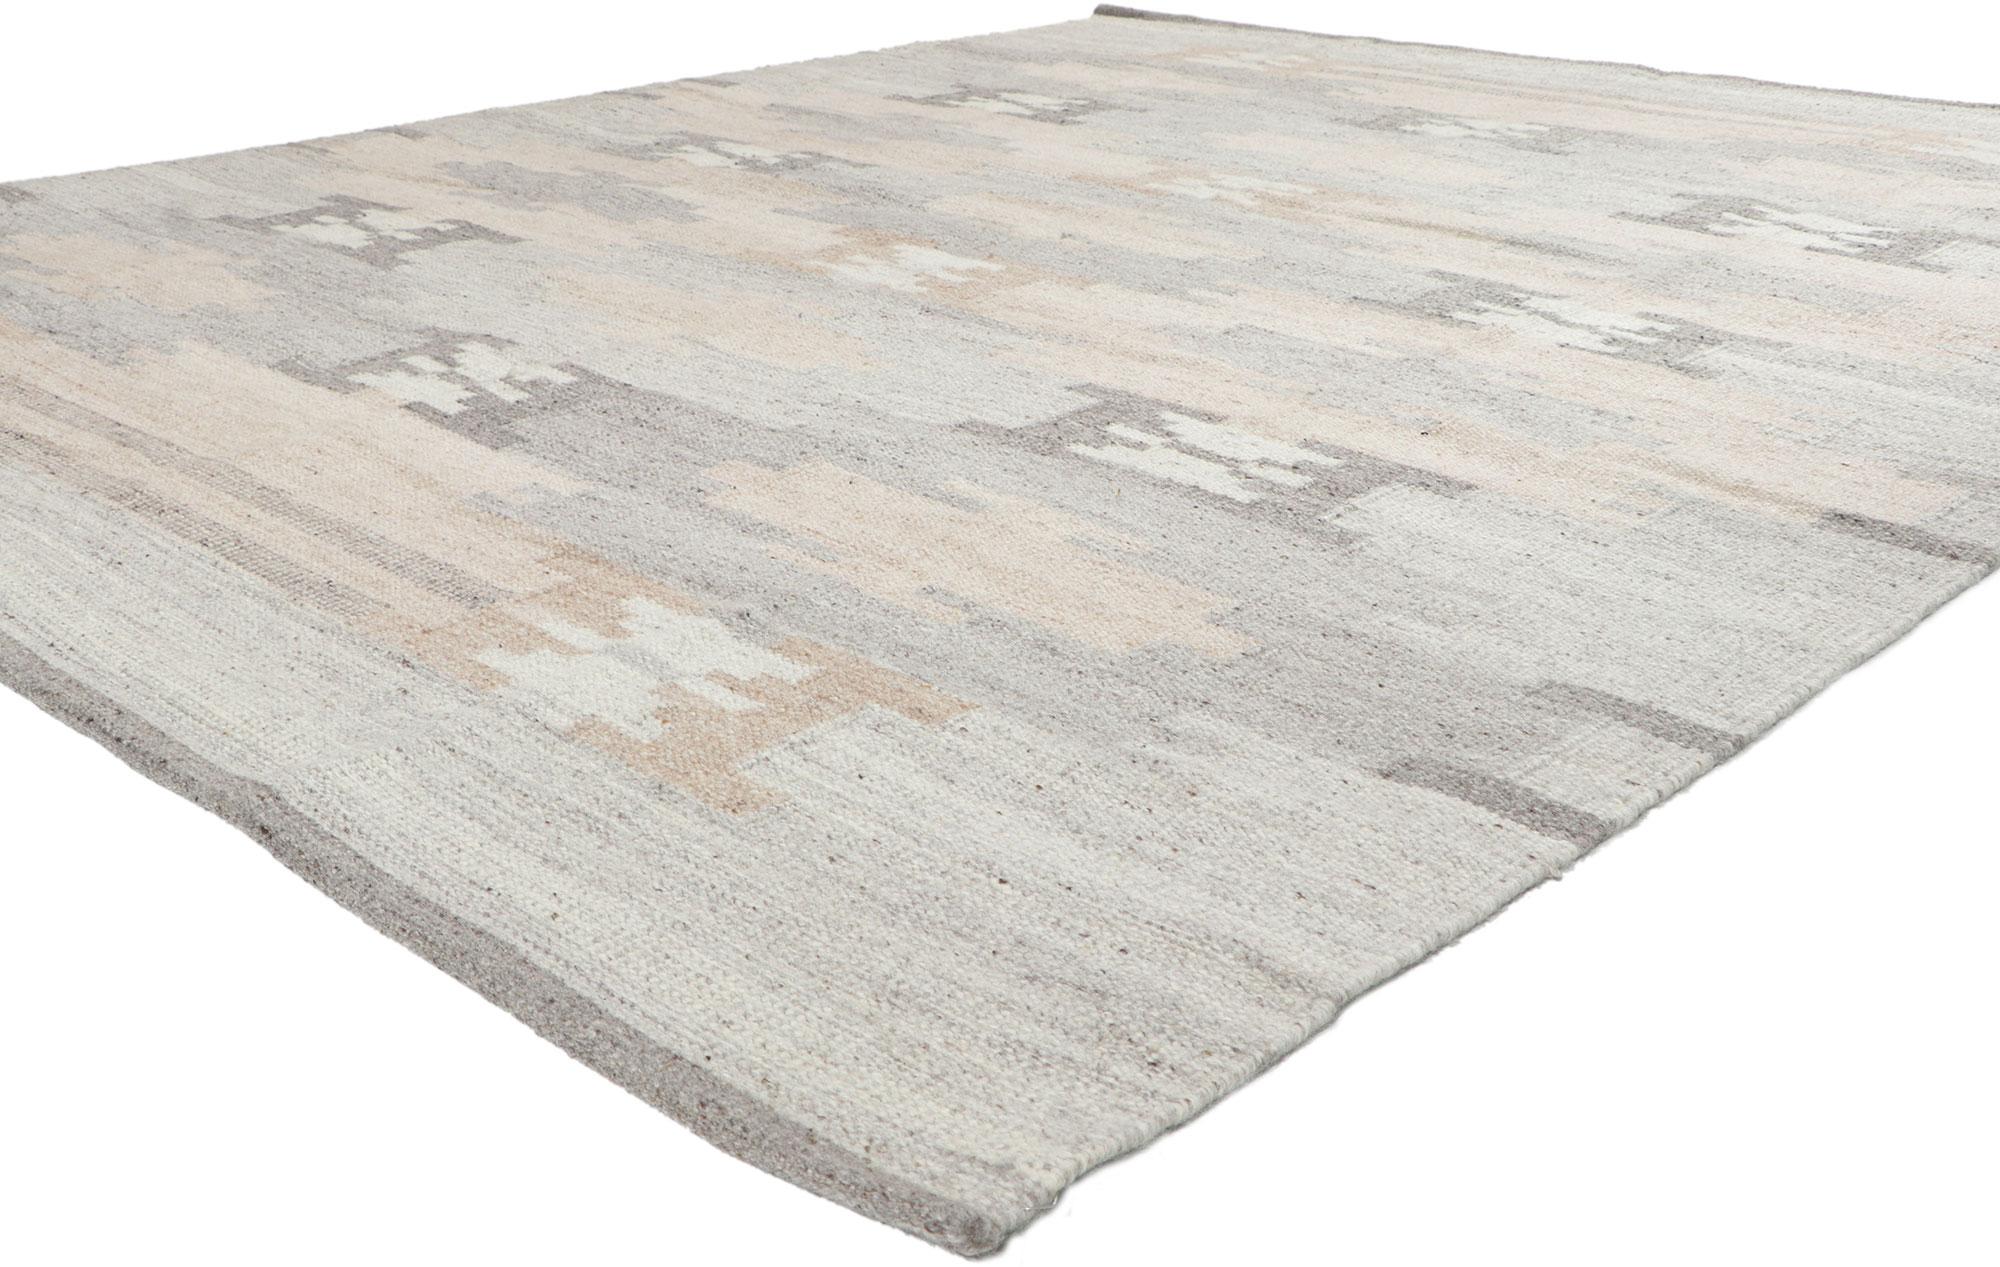 30968 Swedish Inspired Kilim Rug, 08'01 x 09'09. Emanating Scandinavian Modern style with incredible detail and texture, this handwoven Swedish inspired kilim rug is a captivating vision of woven beauty. The eye-catching geometric pattern and